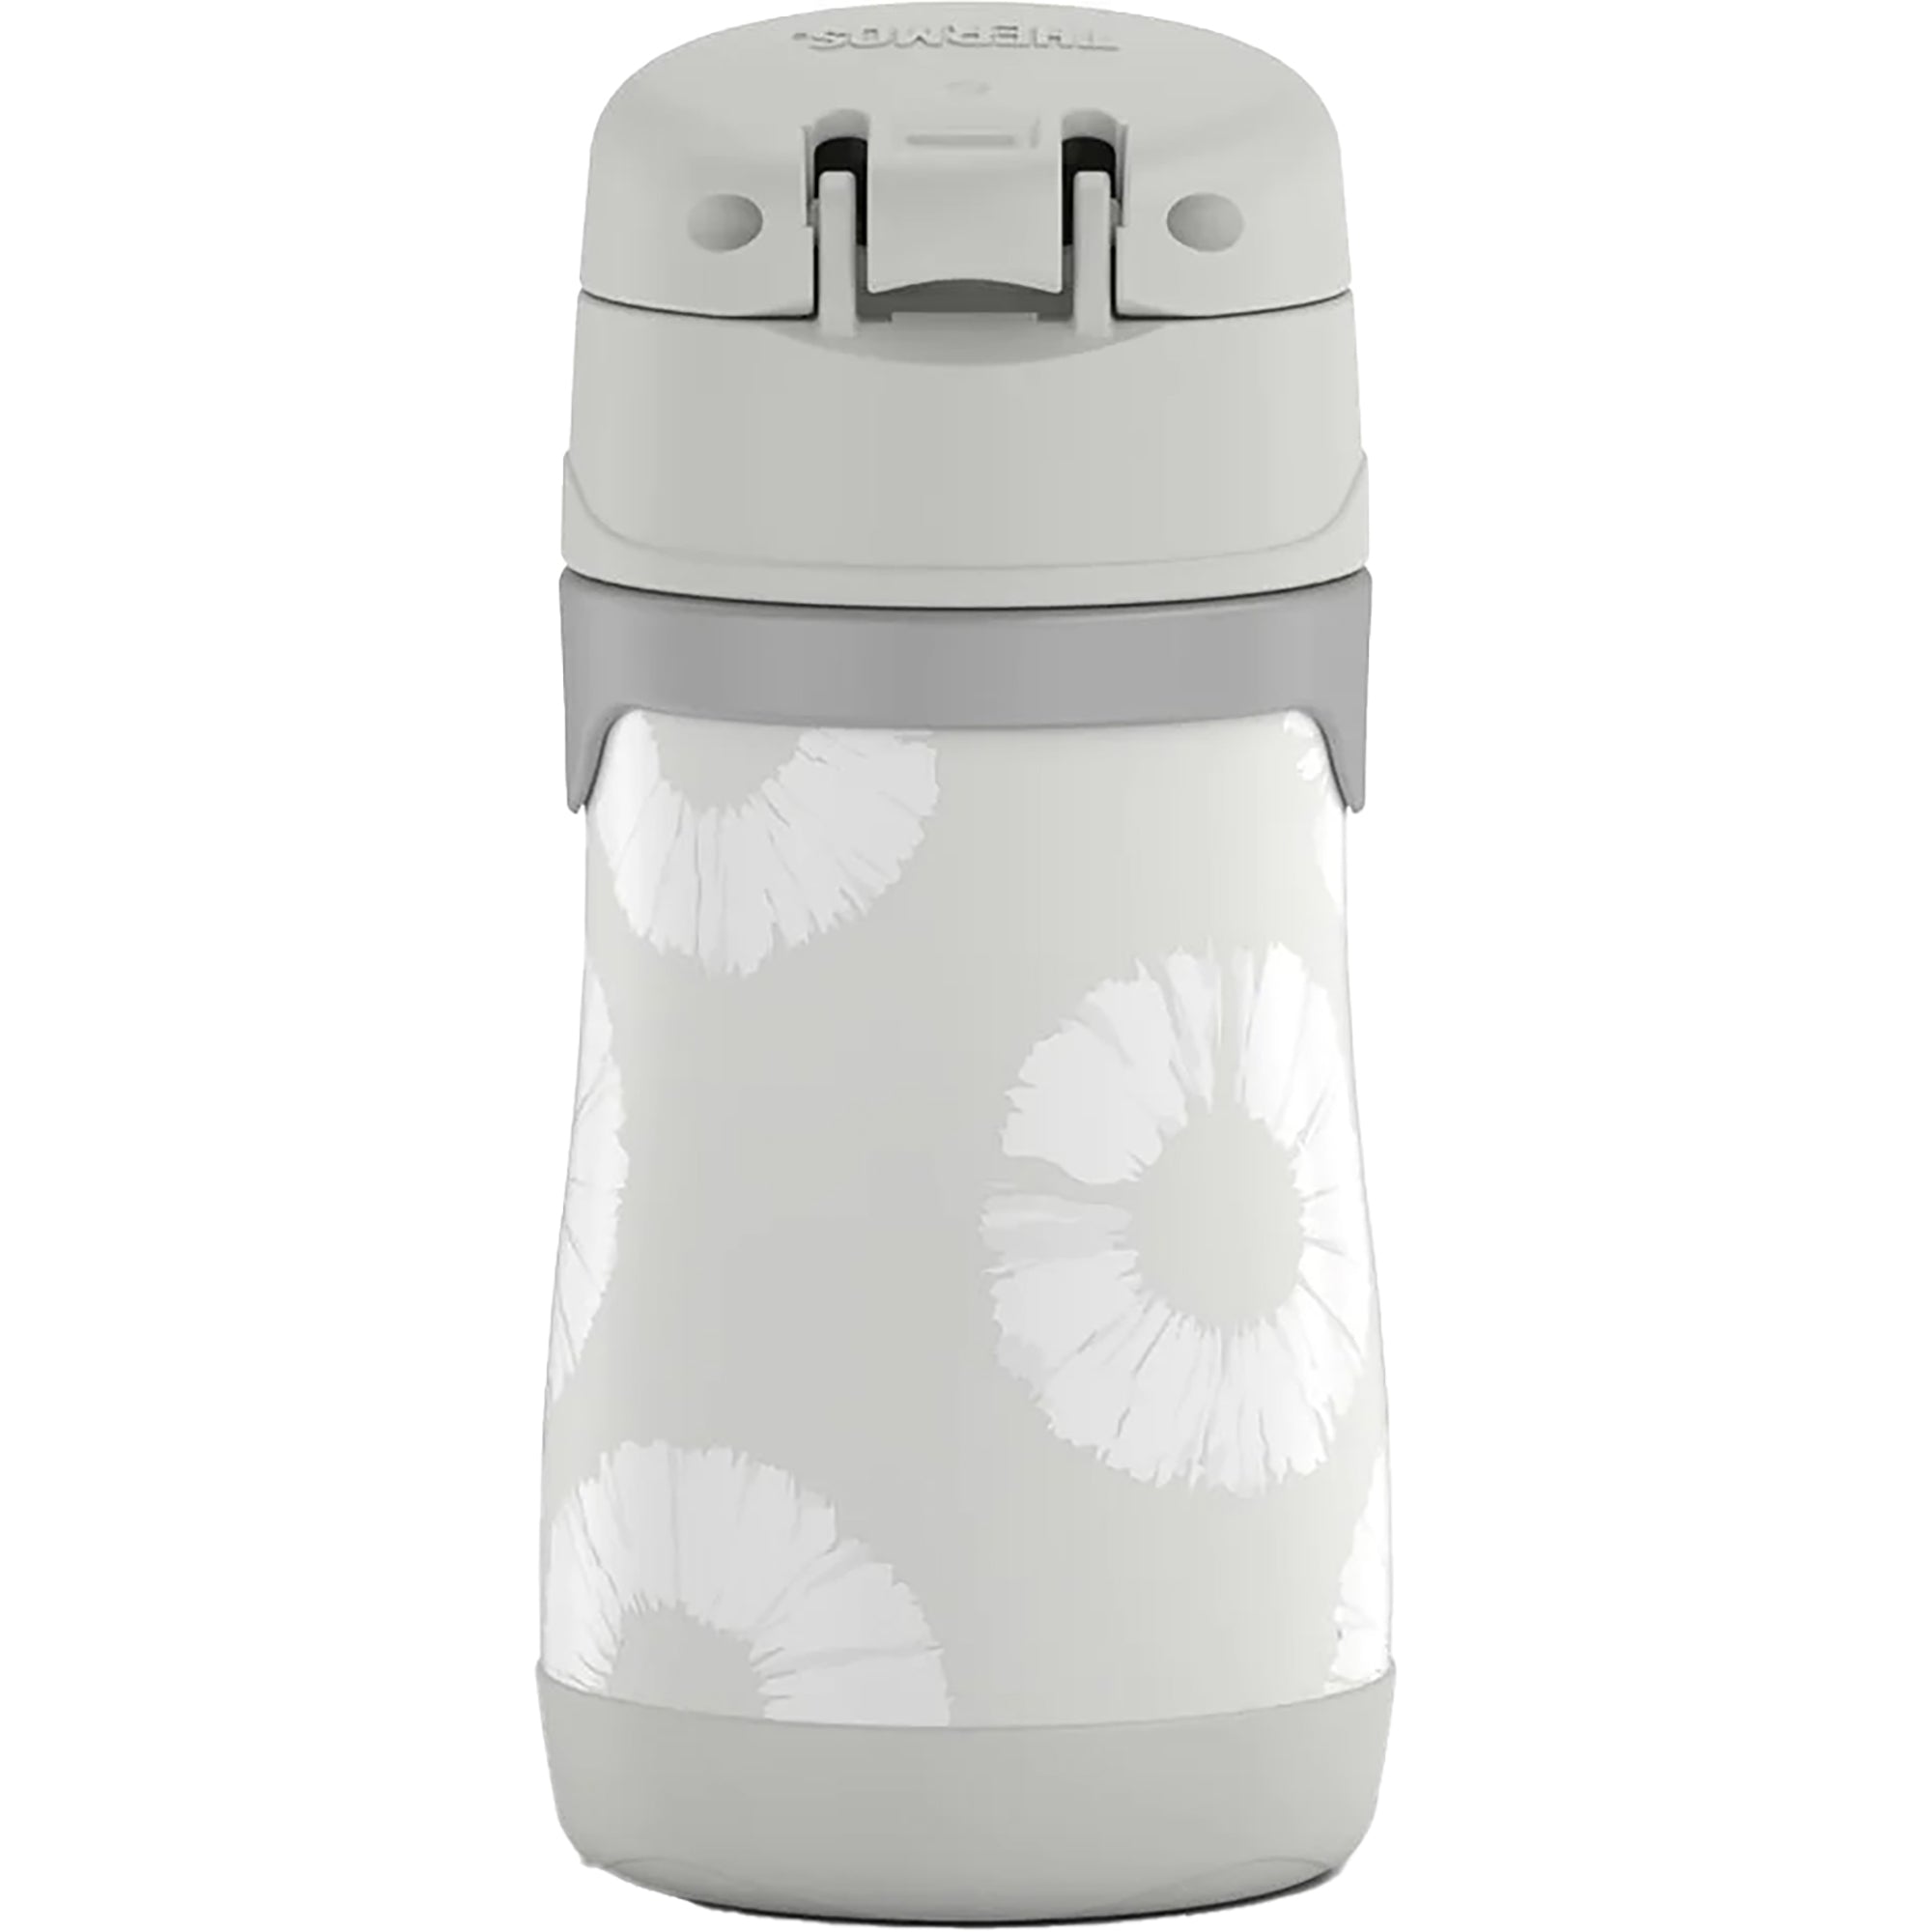 Thermos Kid's 10 oz. Vacuum Insulated Stainless Steel Water Bottle- Tie Dye Gray Thermos